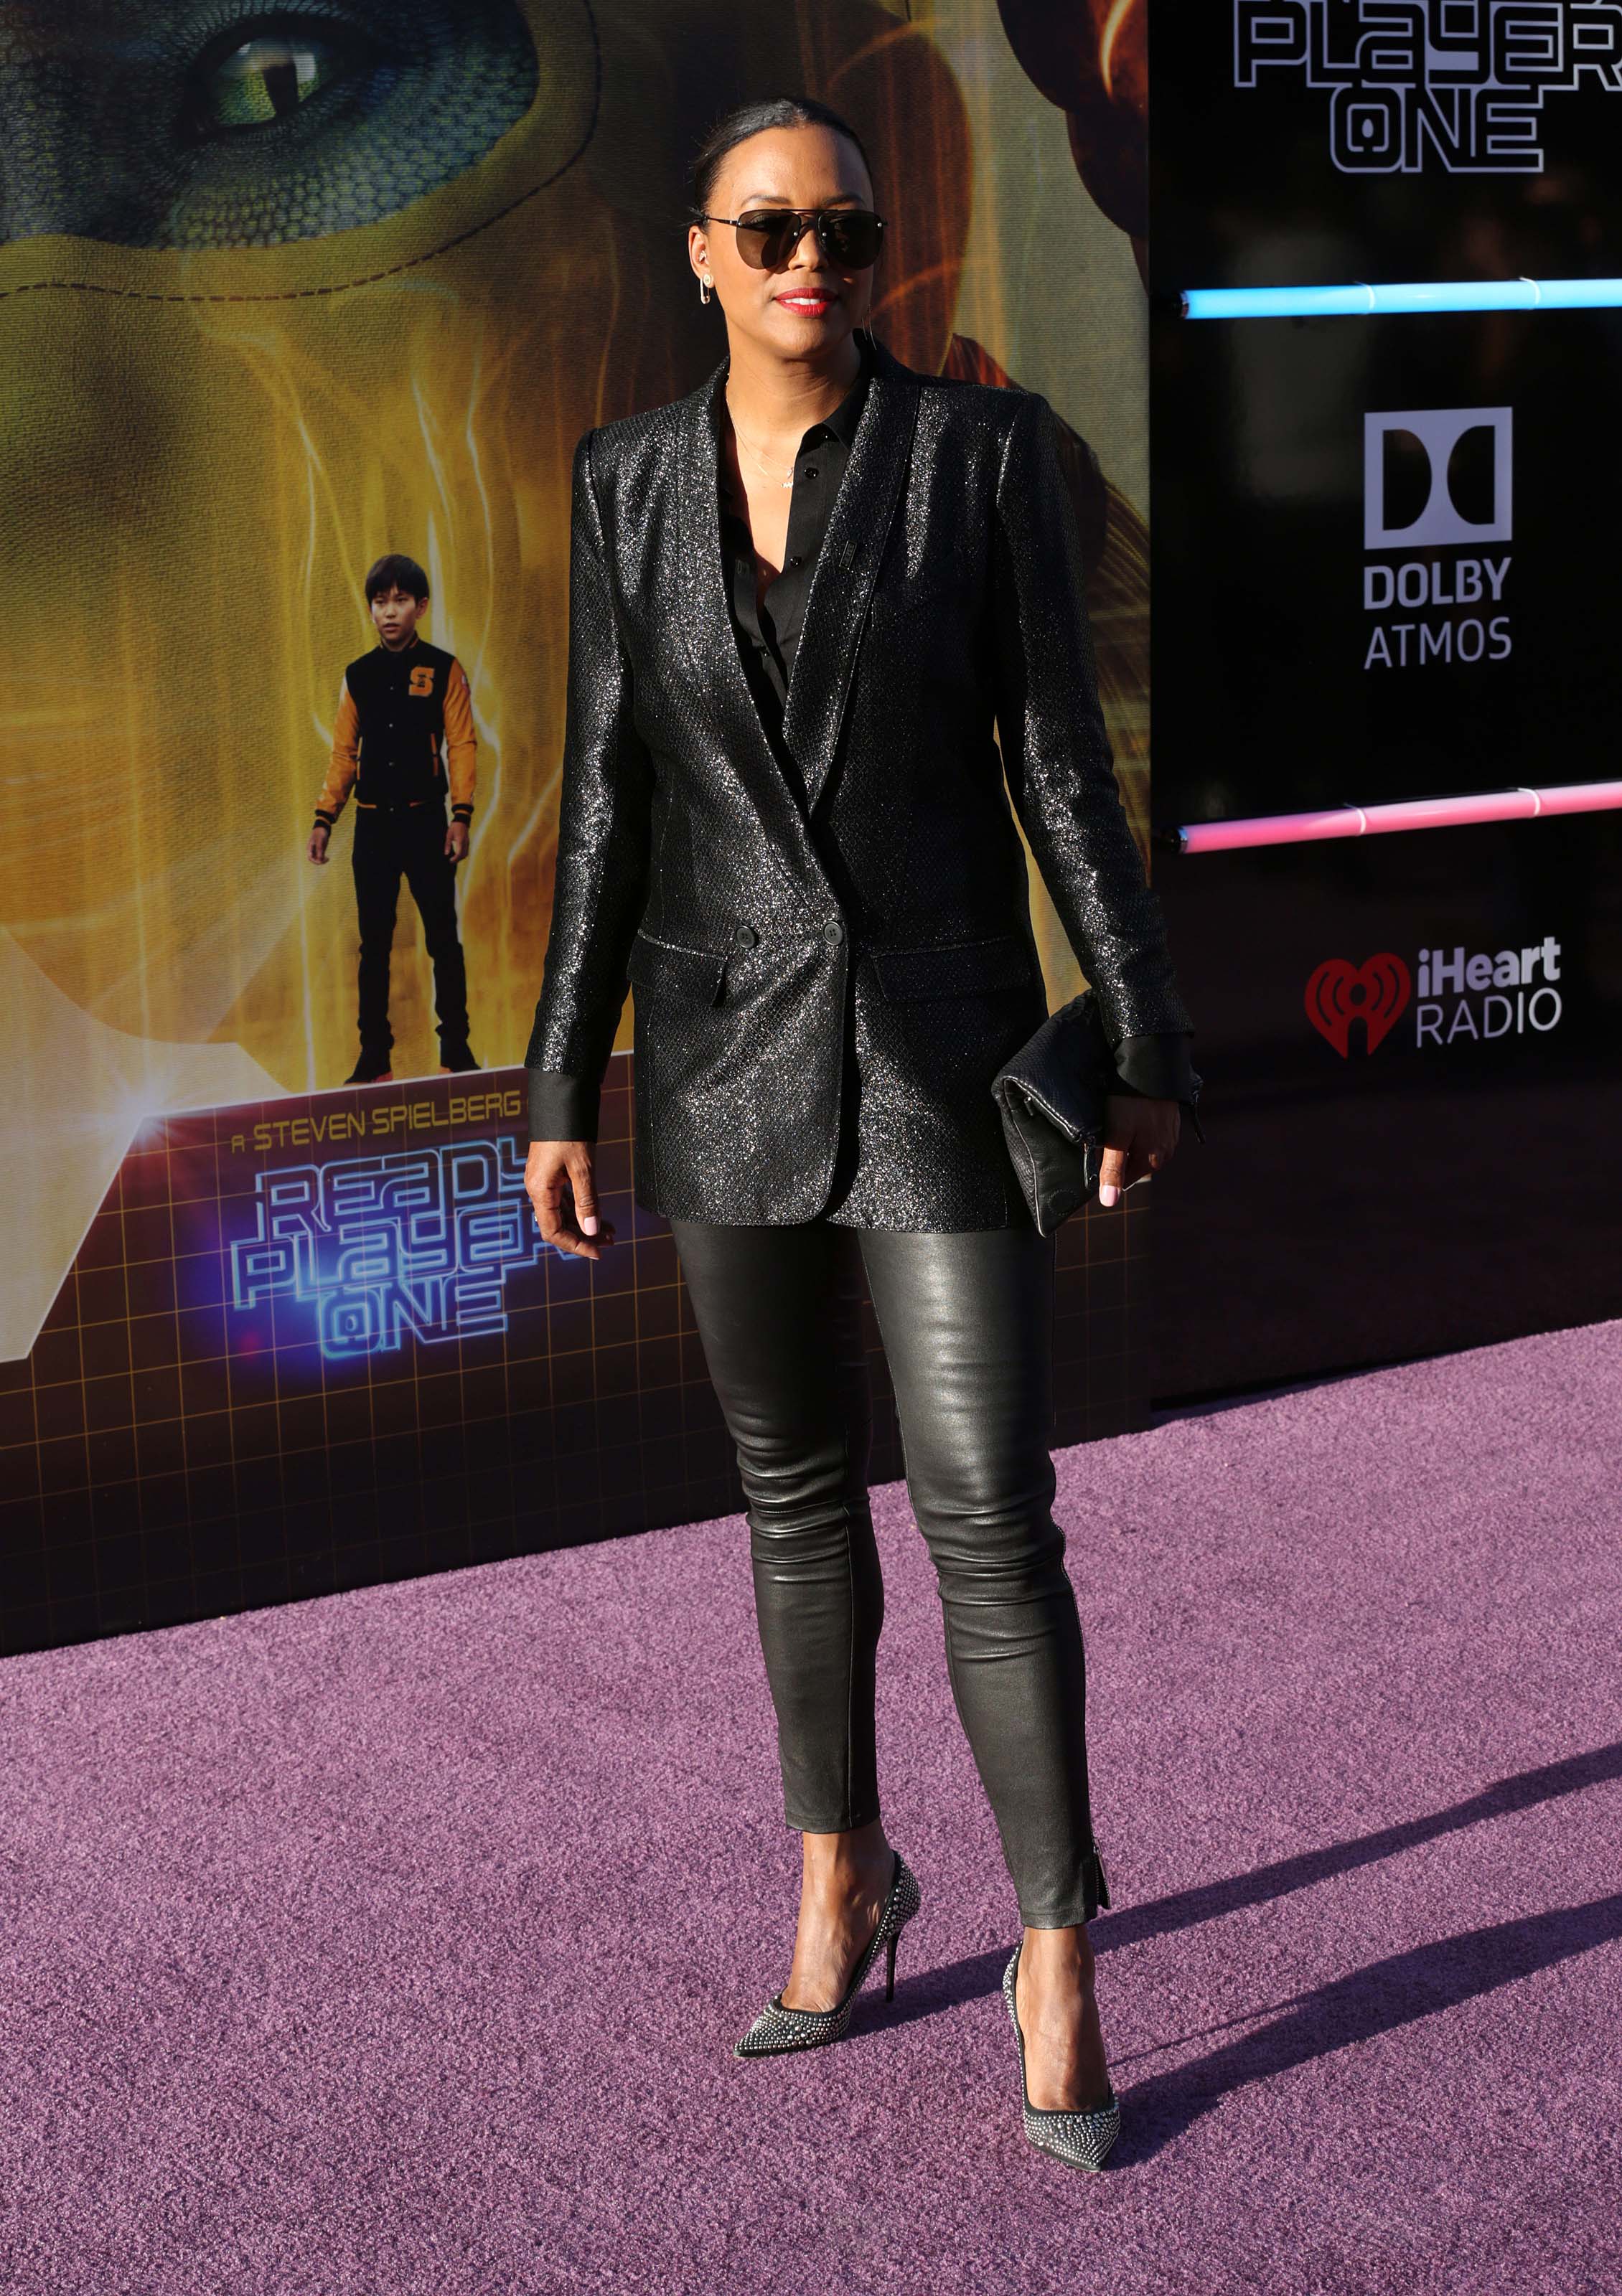 Aisha Tyler attends Ready Player One film premiere